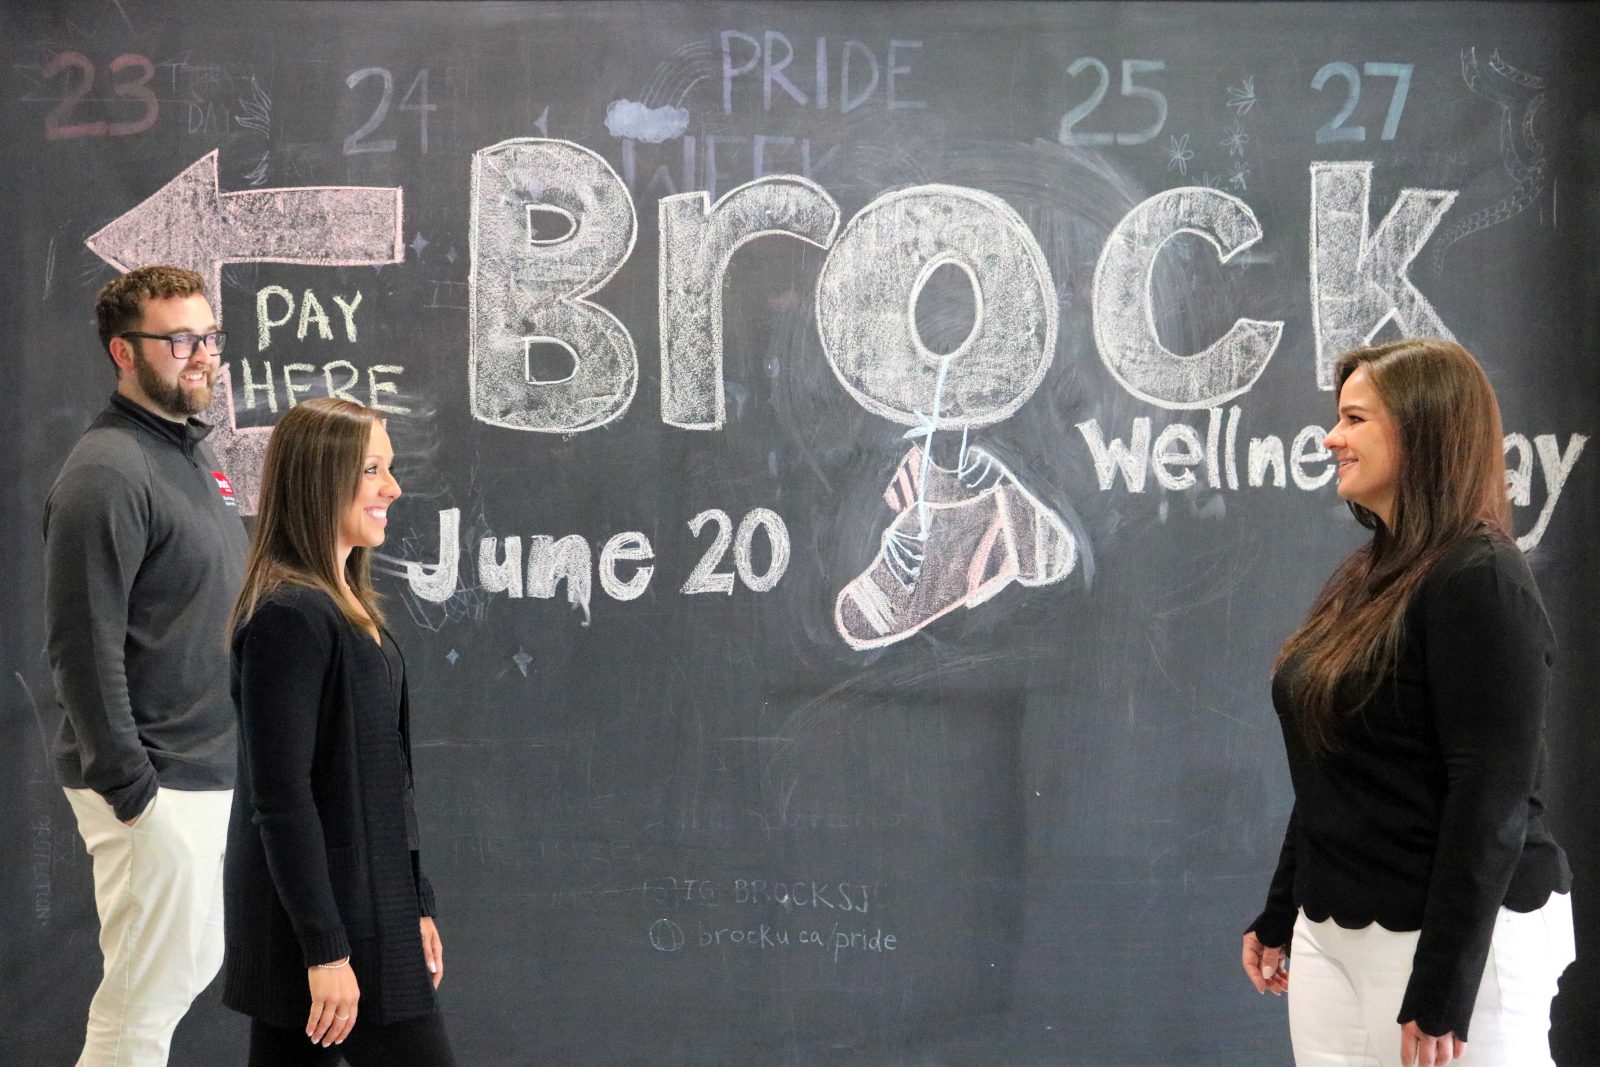 Two people walk toward another person standing in front of a chalkboard wall sign promoting Brock’s Employee Wellness Day.